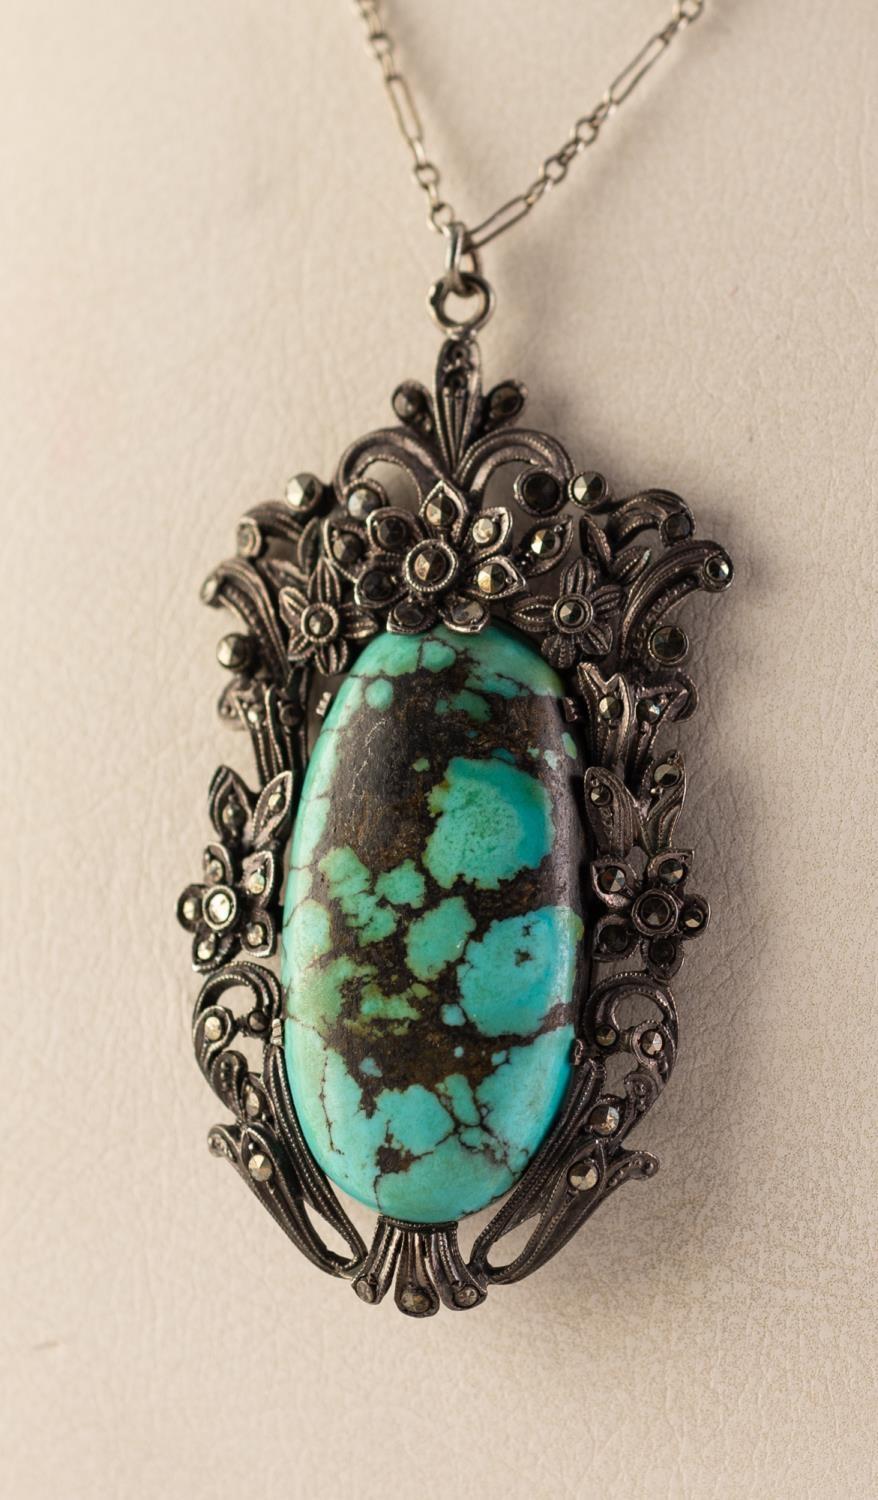 LARGE SILVER AND MARCASITE VINTAGE PENDANT set with a large cabochon oval turquoise in a marcasite - Image 2 of 2